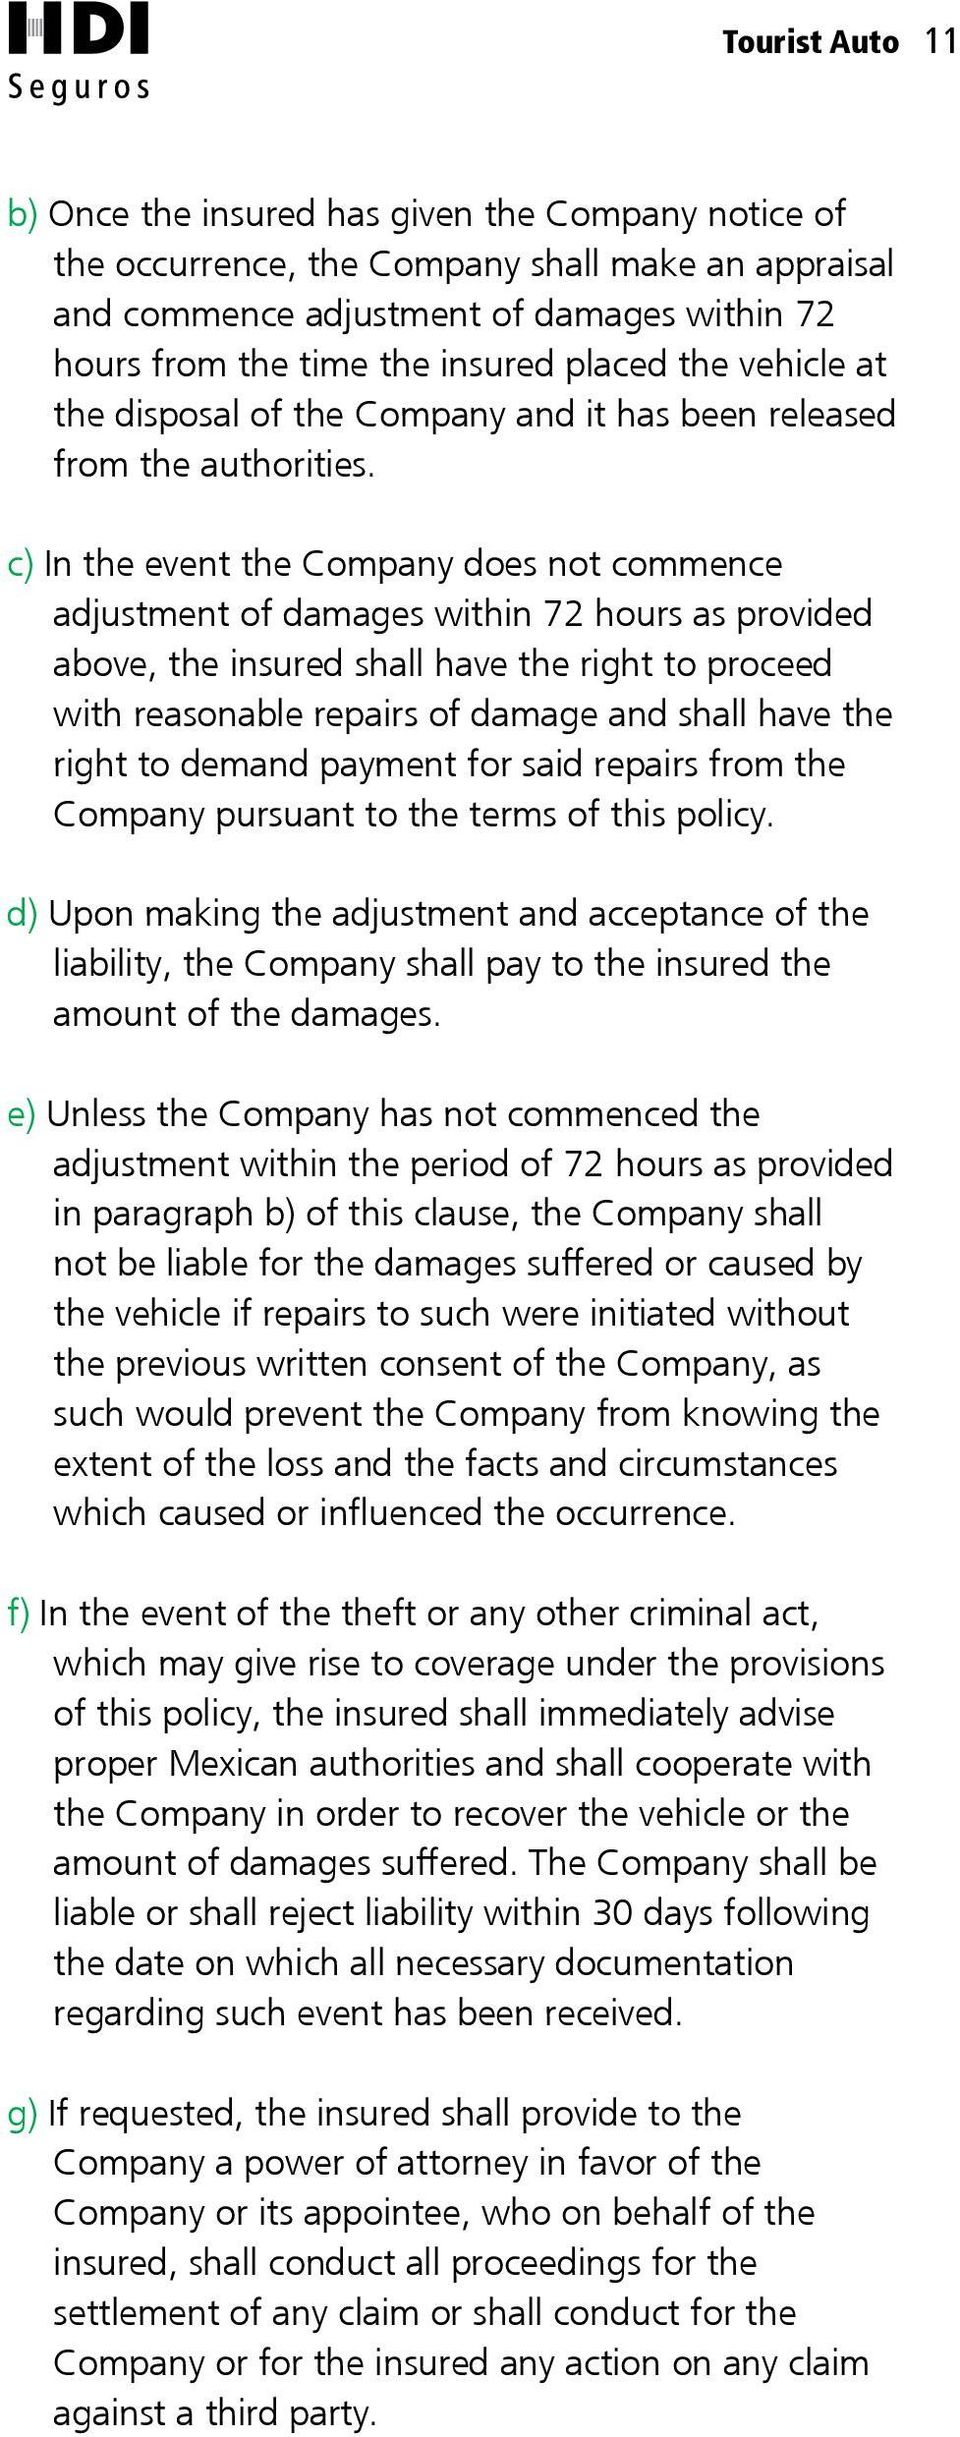 c) In the event the Company does not commence adjustment of damages within 72 hours as provided above, the insured shall have the right to proceed with reasonable repairs of damage and shall have the